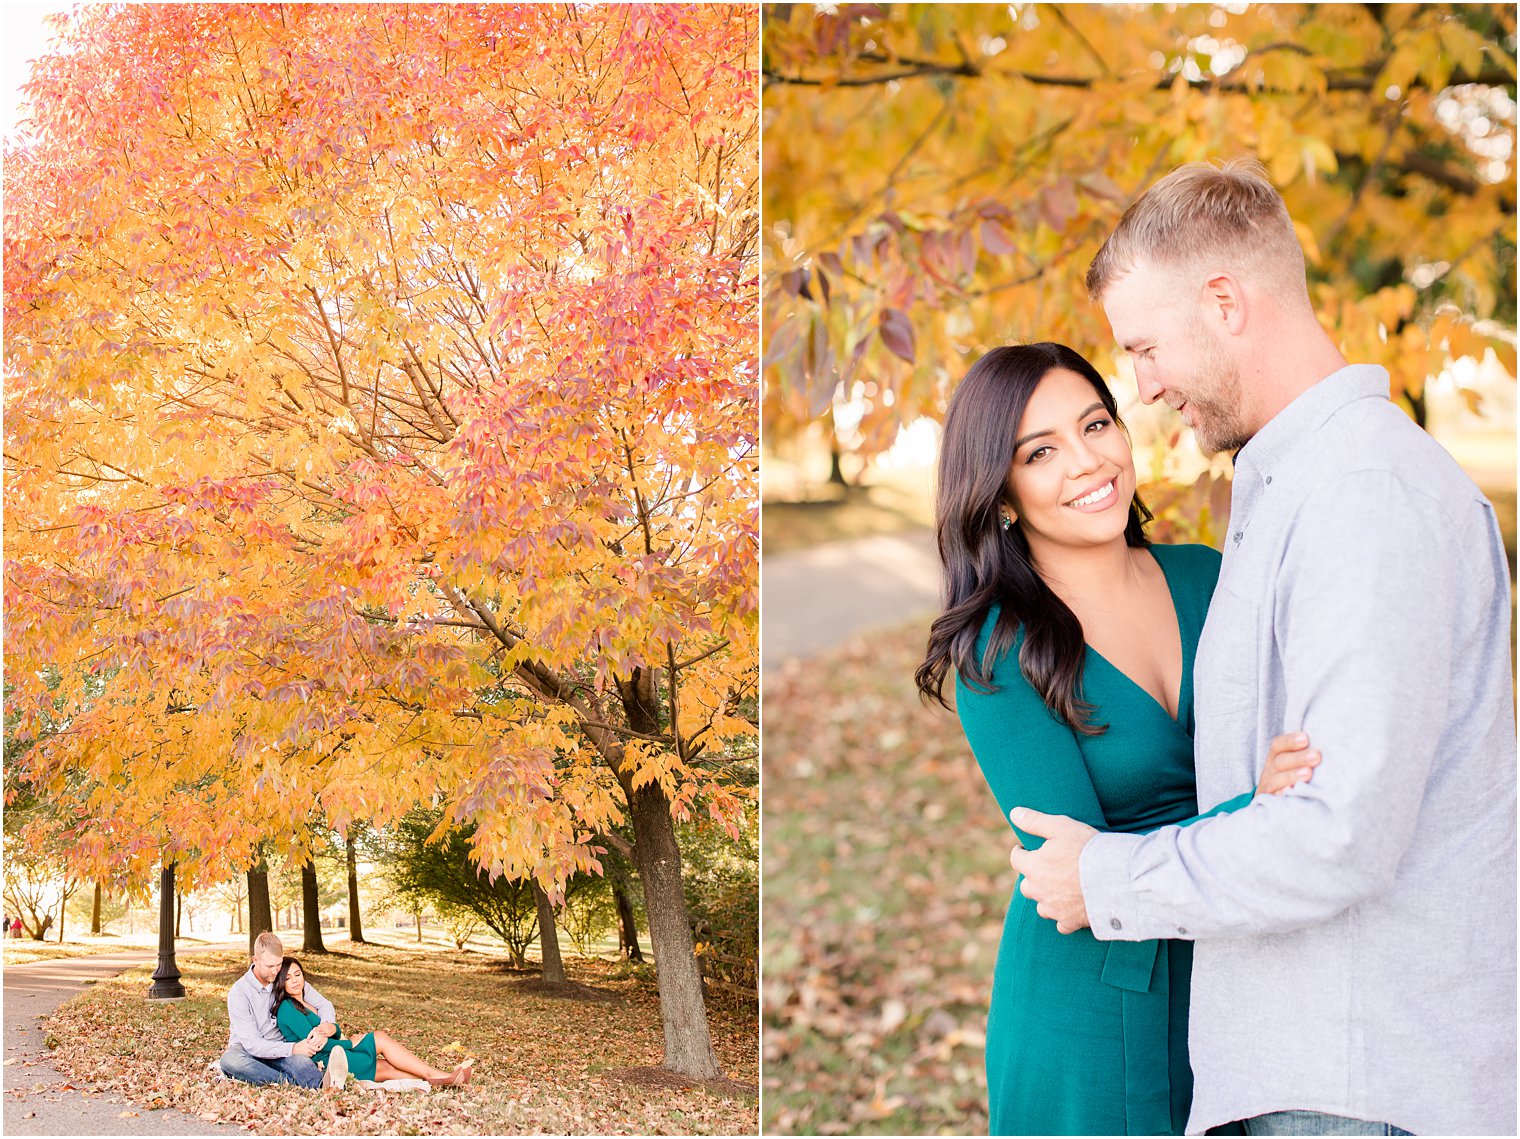 Fall engagement photos with beautiful foliage